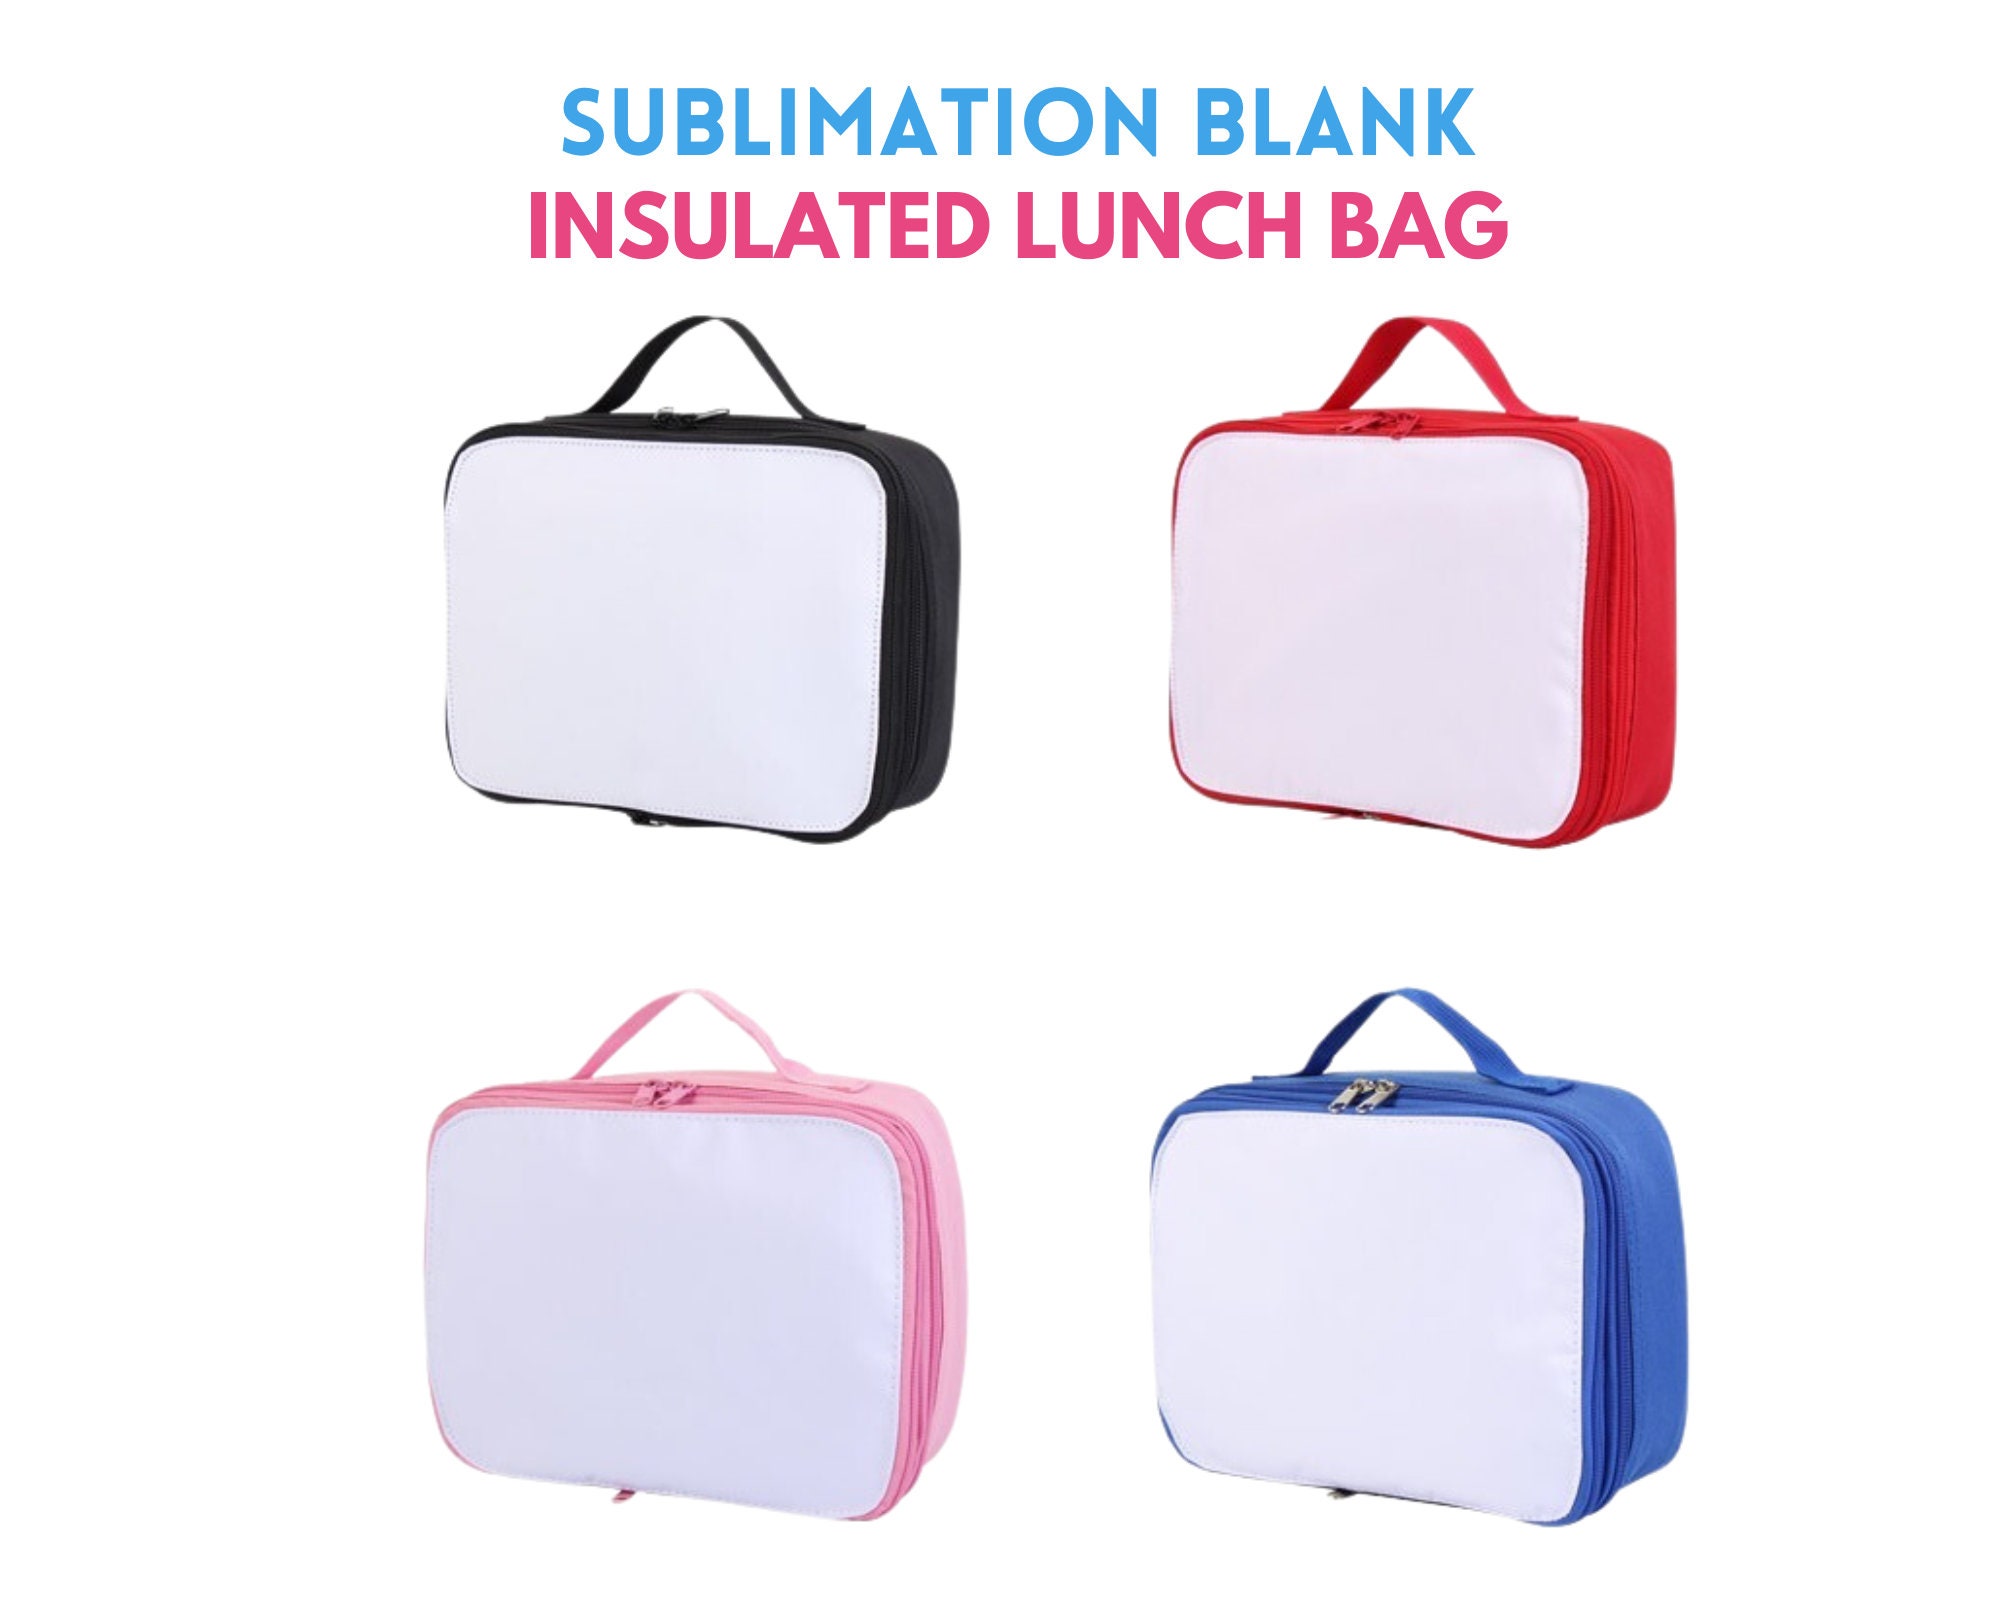  Paterr 24 Pieces Sublimation Blanks Neoprene Lunch Bag  Insulated Lunch Box Reusable Lunch Bag Case Thermal Food Carry Case  Handbags with Zipper for Adults Work Travel Picnic DIY, White: Home 